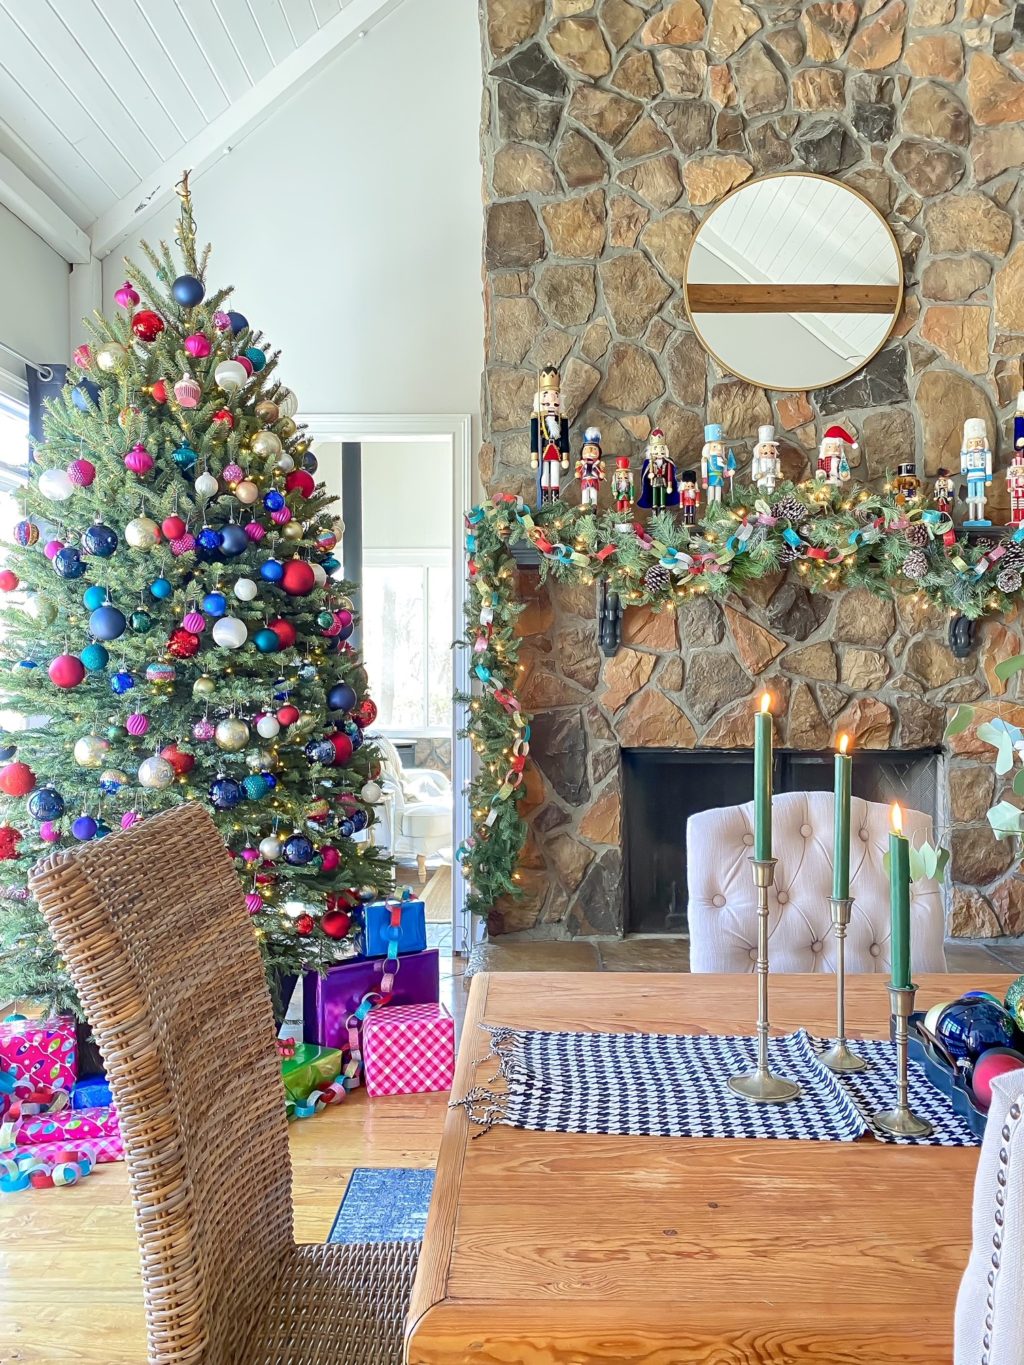 Christmas tree with different colored ornaments and nutcrackers on mantel